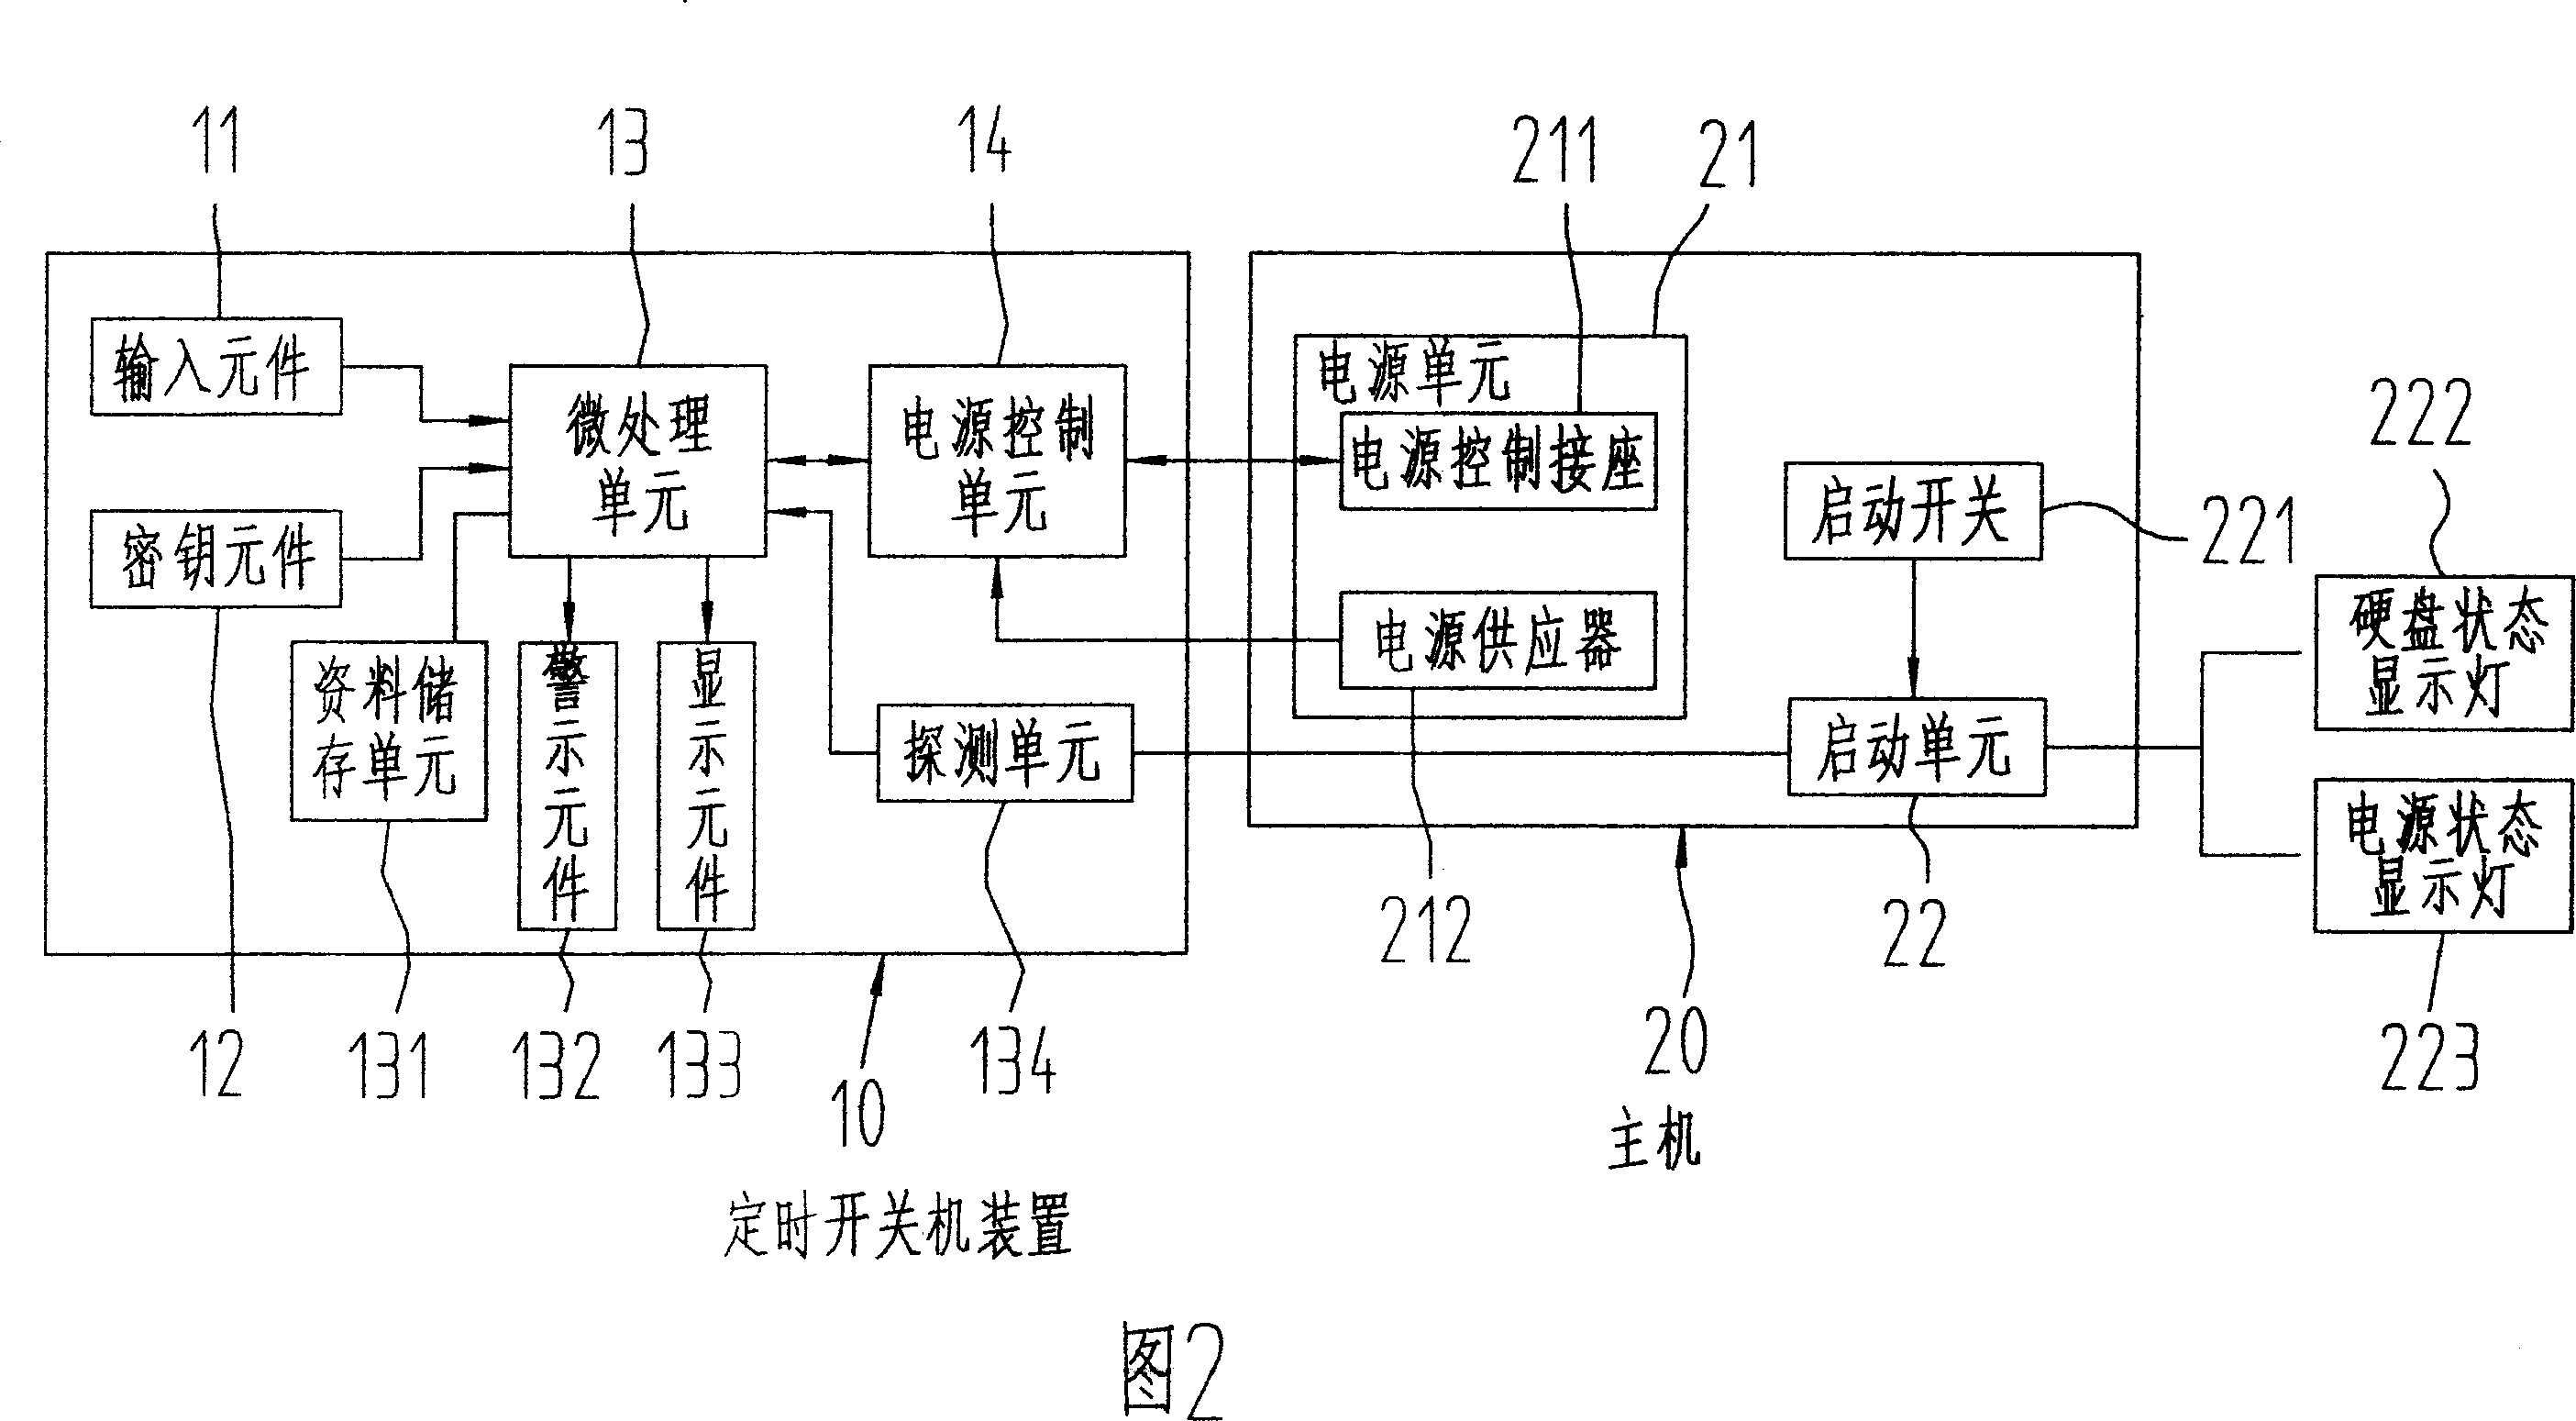 Timing turn-on turn-off device and the method